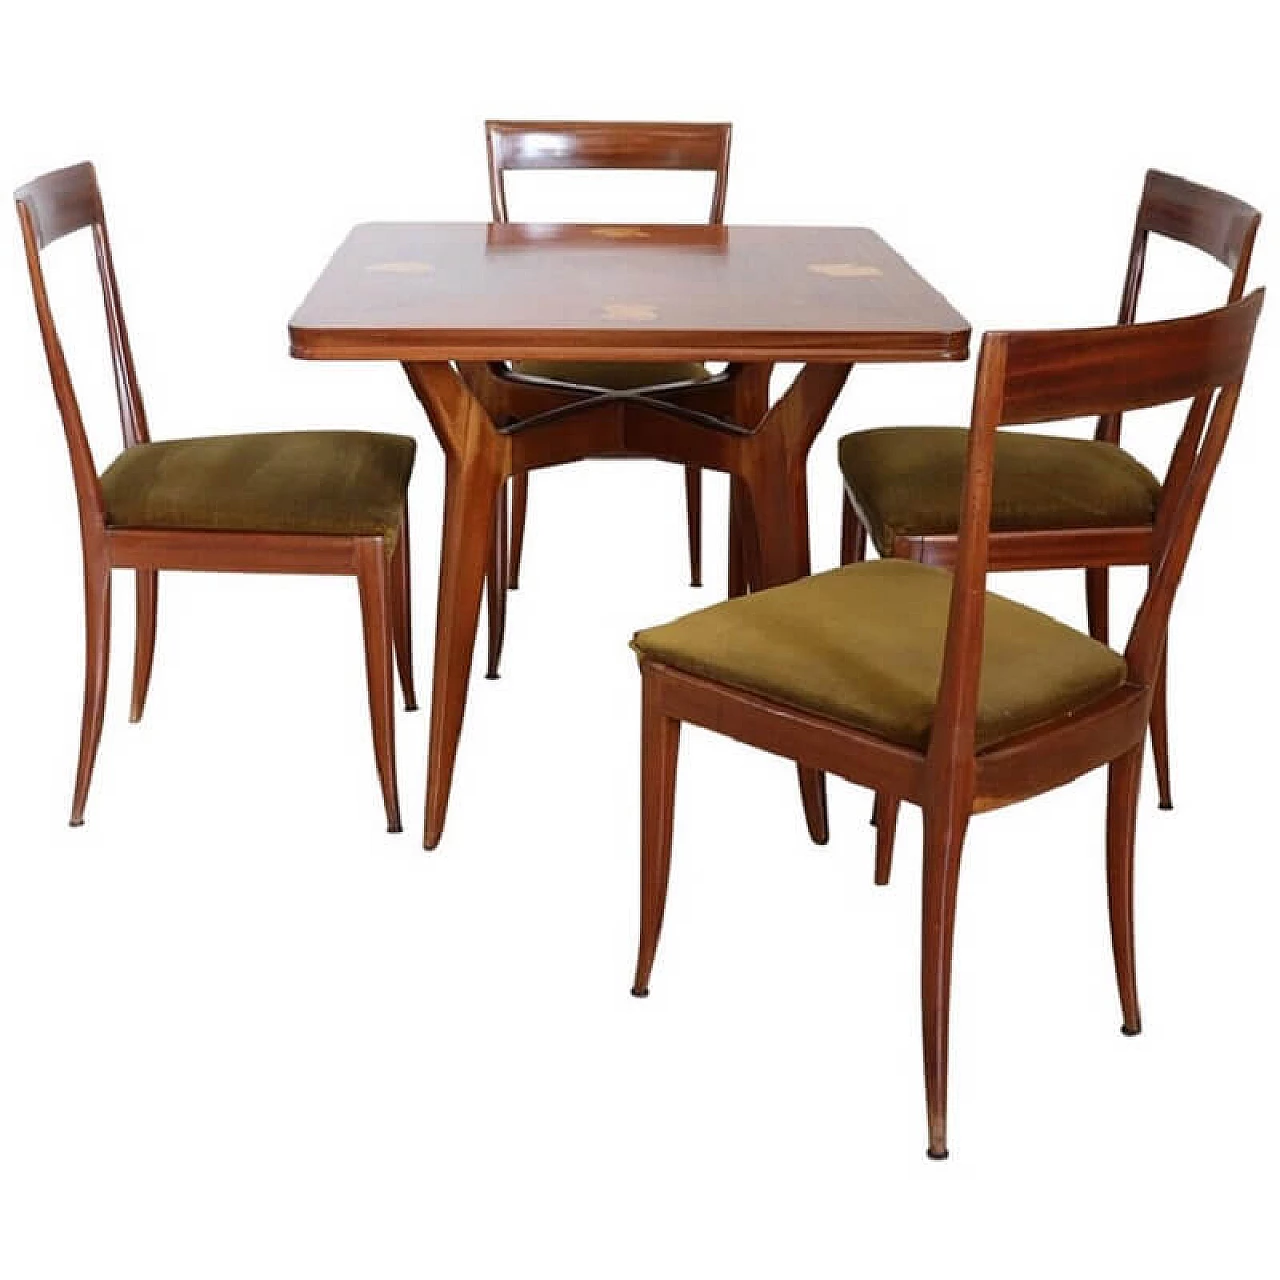 Inlaid mahogany table and 4 chairs, Italian manufacture, 1940s 1068600